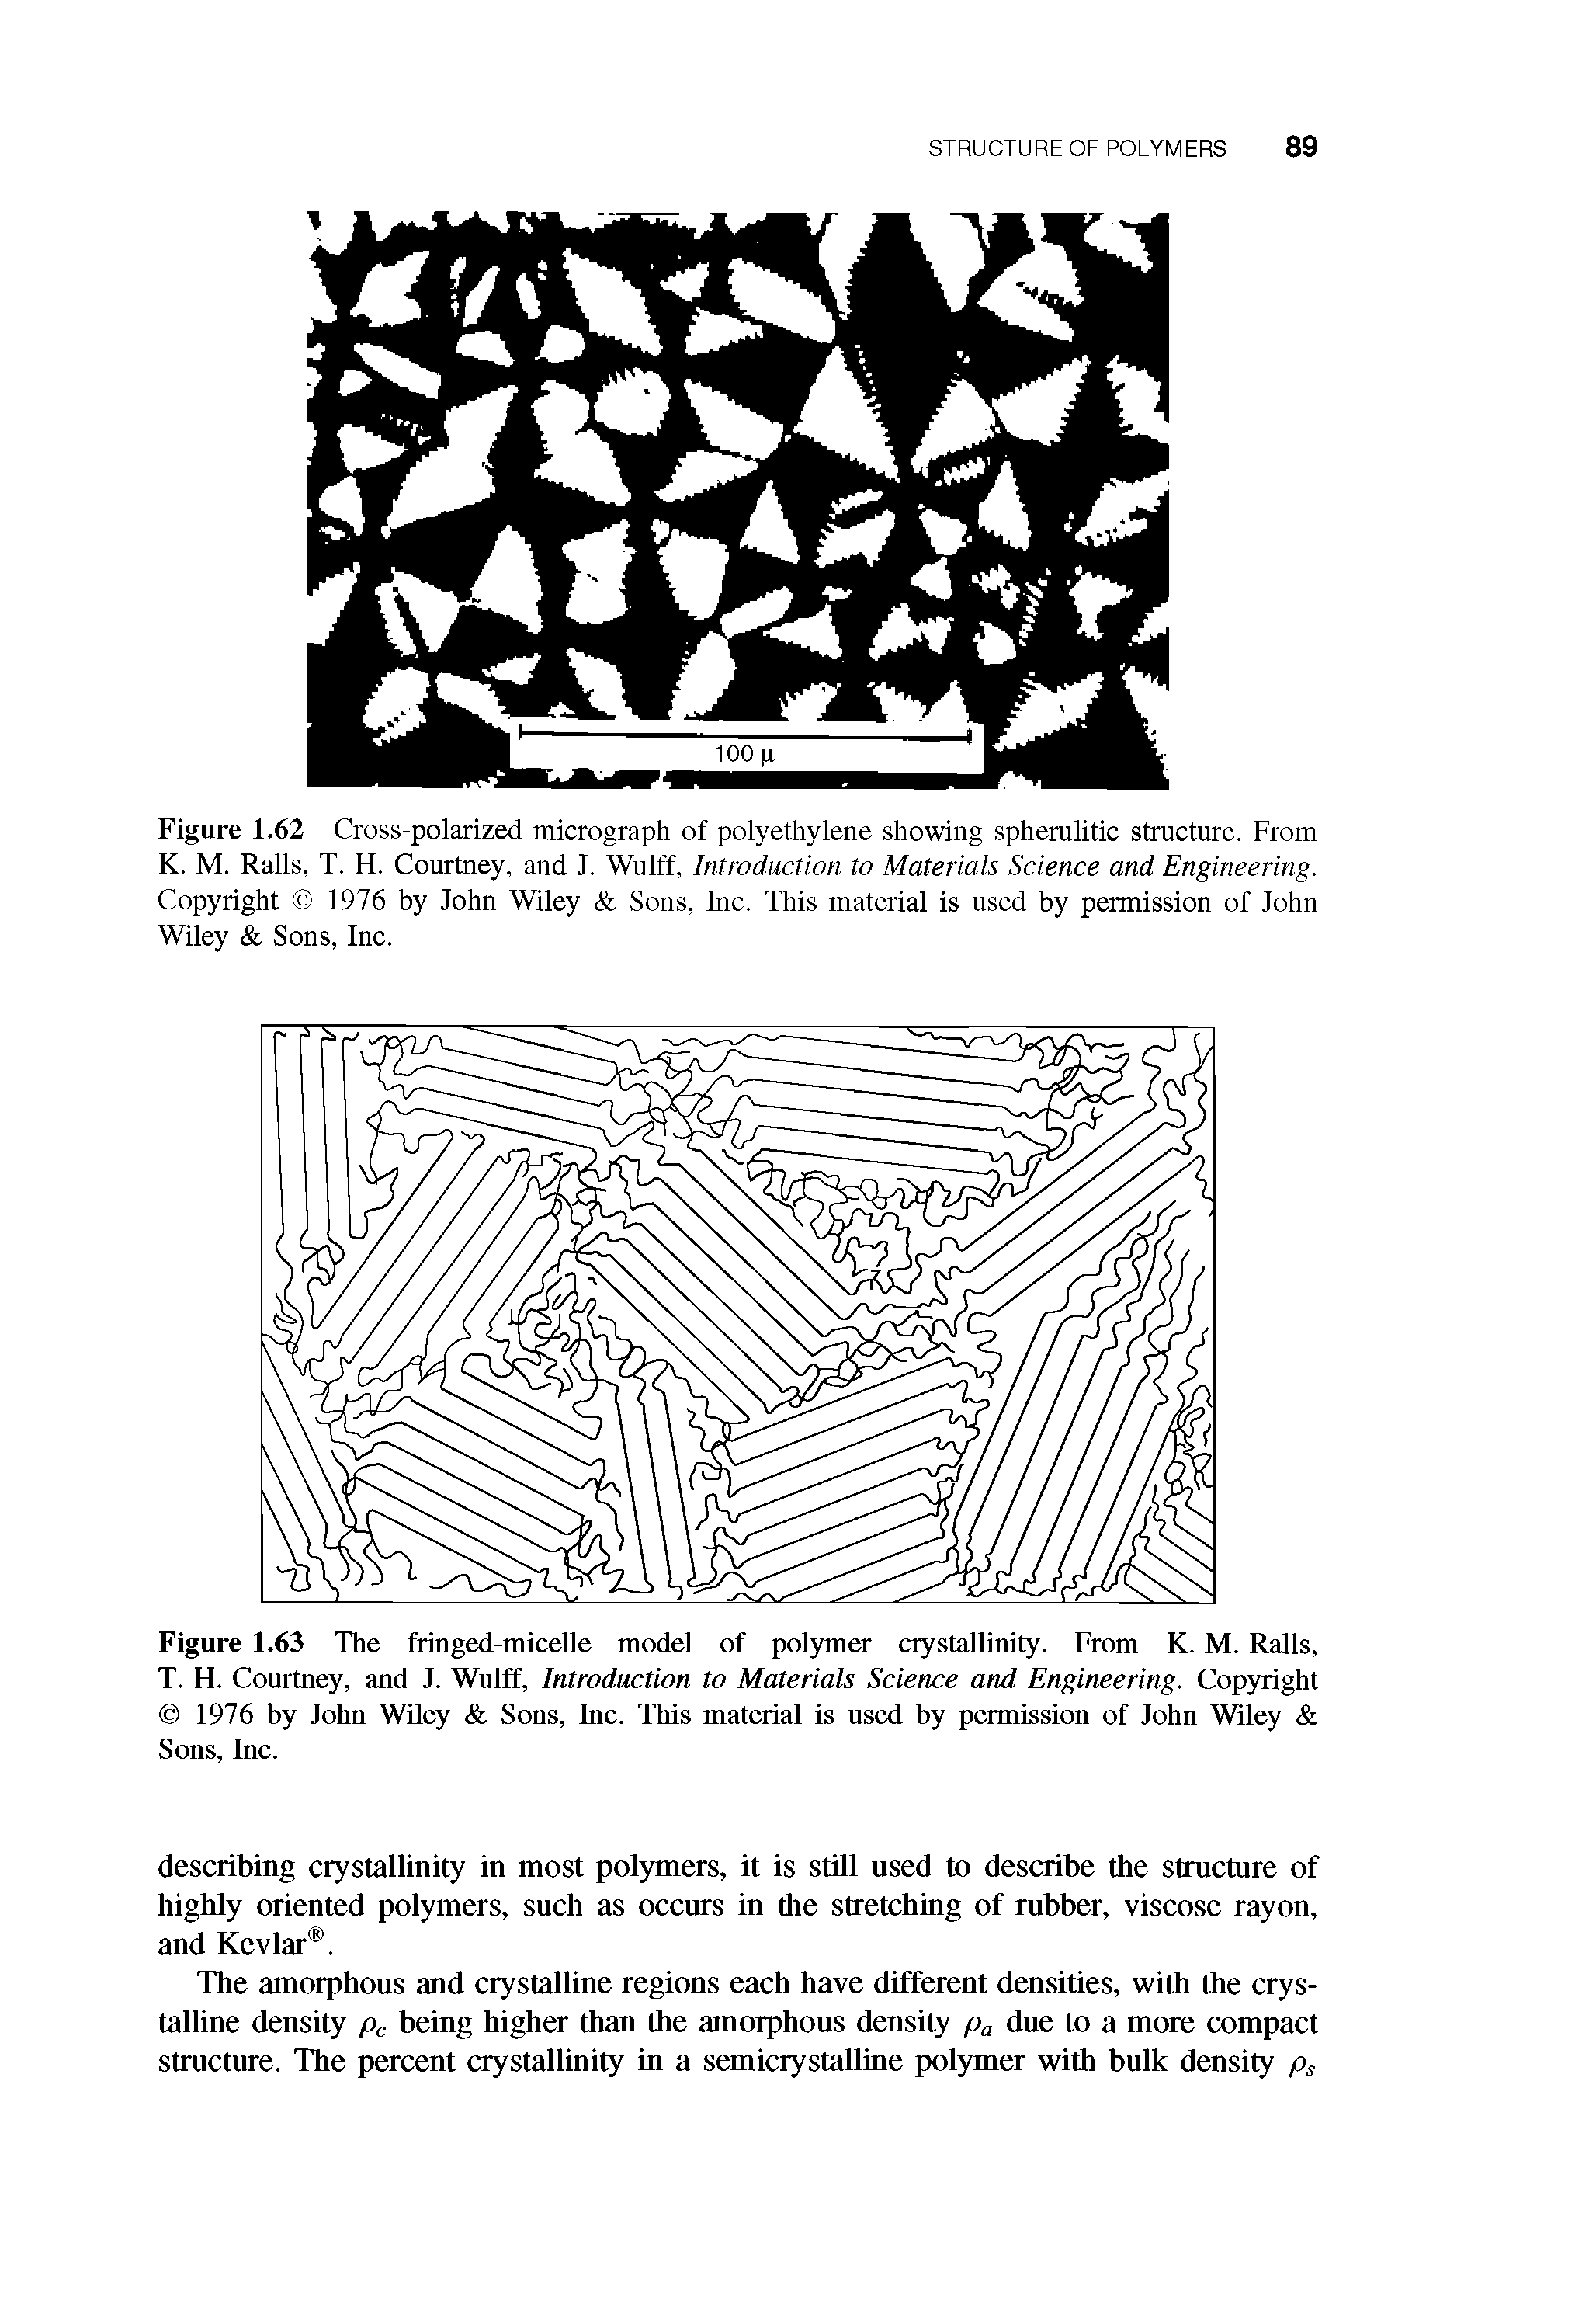 Figure 1.62 Cross-polarized micrograph of polyethylene showing spherulitic structure. From K. M. Ralls, T. H. Courtney, and J. Wulff, Introduction to Materials Science and Engineering. Copyright 1976 by John Wiley Sons, Inc. This material is used by permission of John Wiley Sons, Inc.